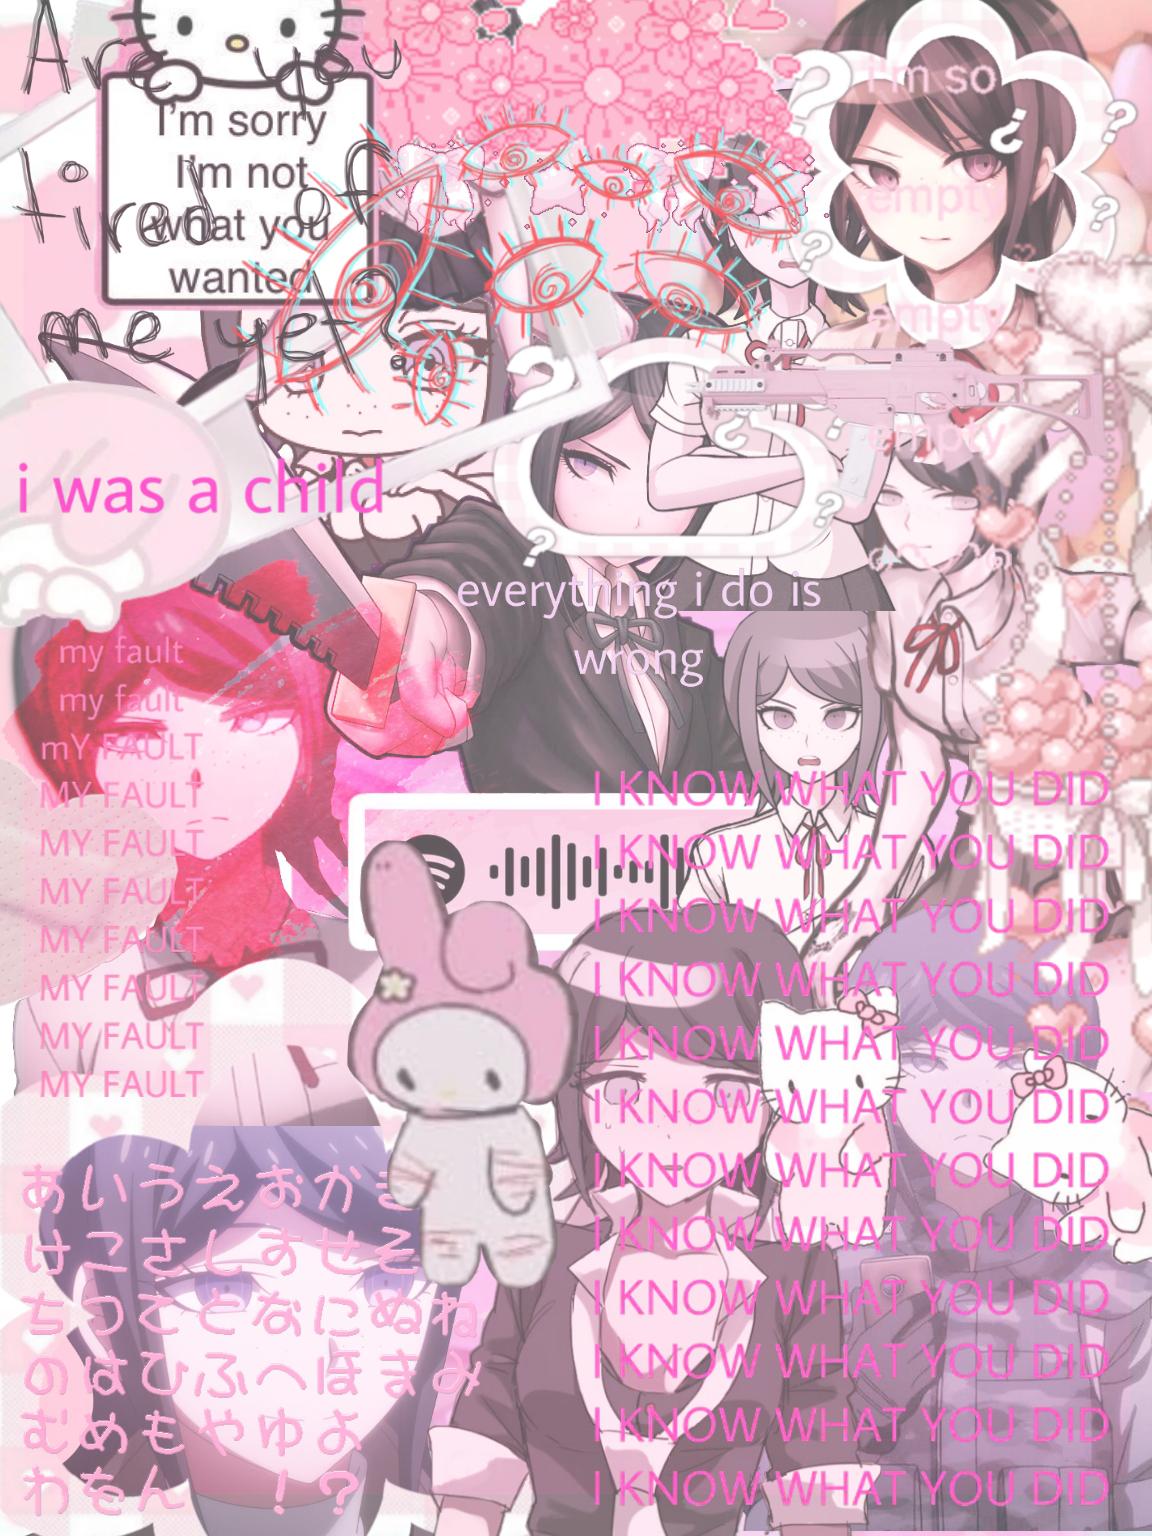 A collage of anime characters and text - Traumacore